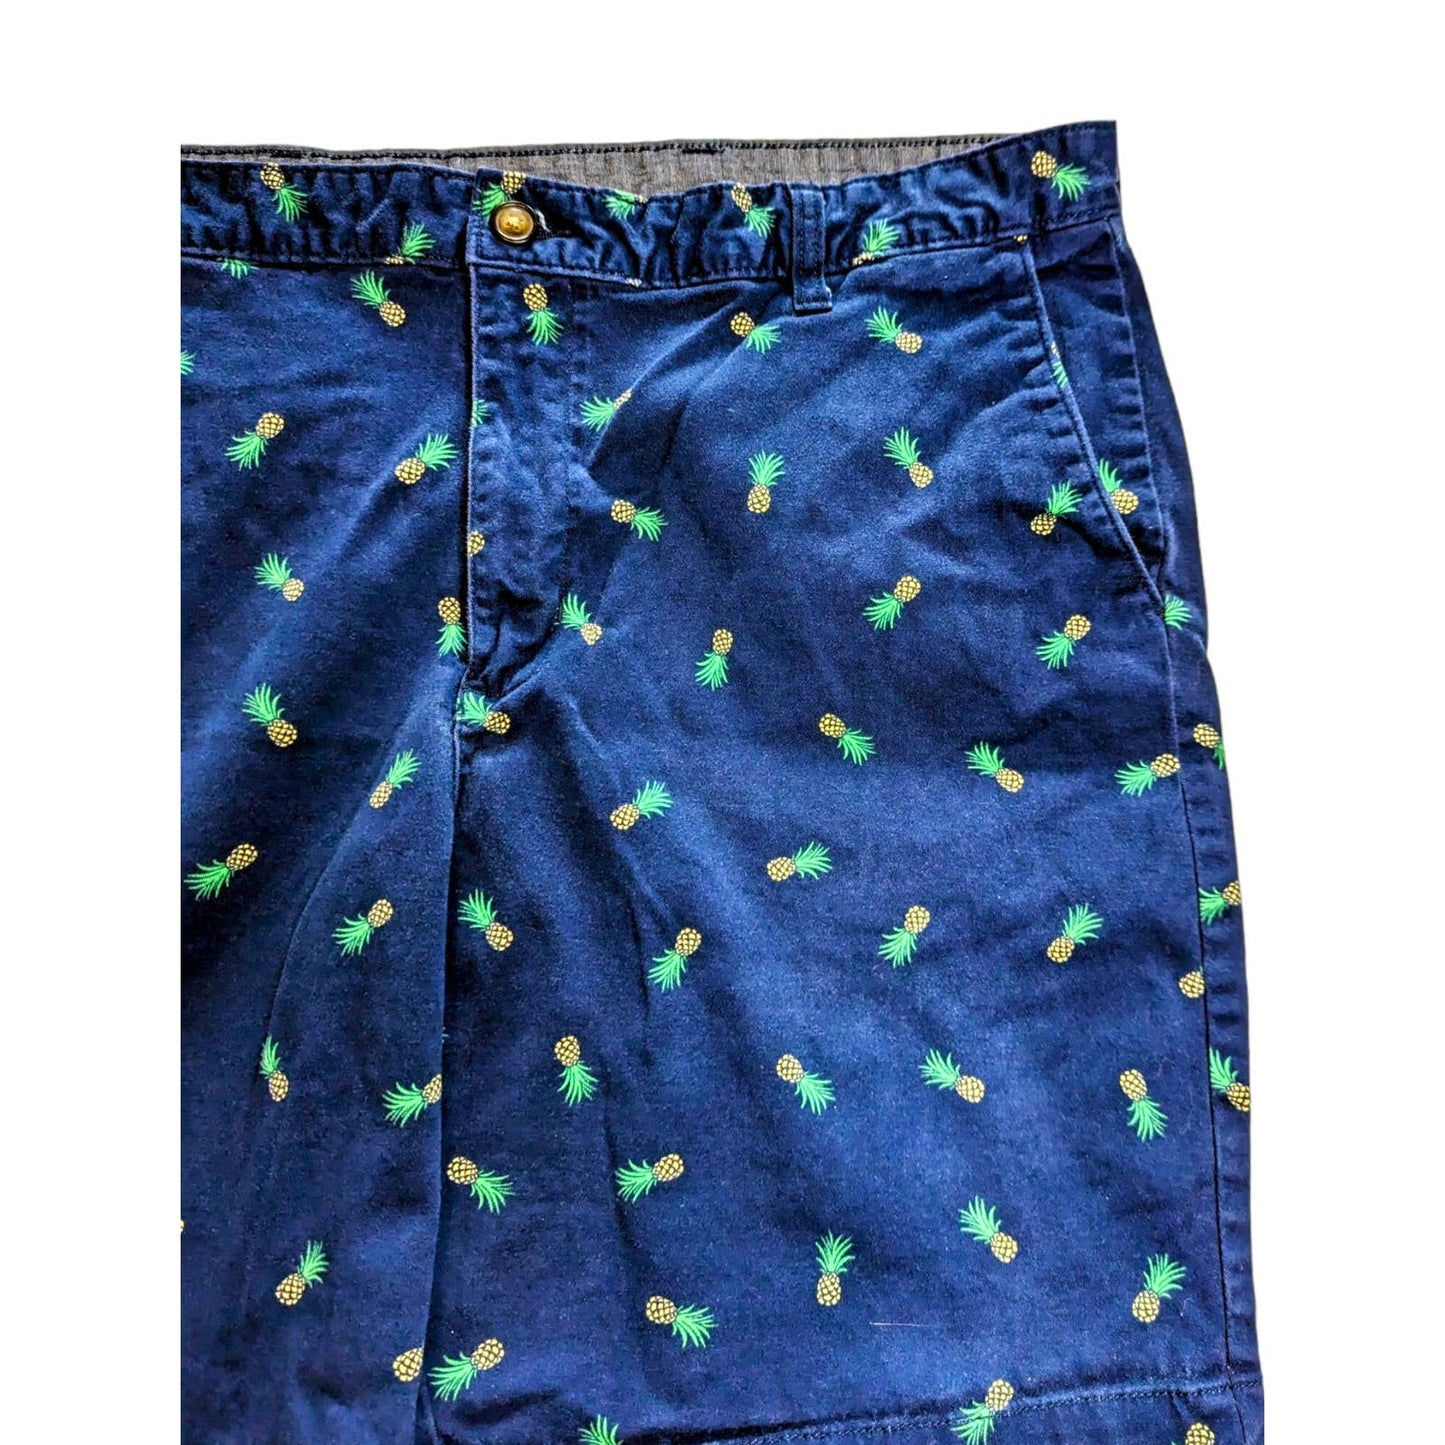 GEORGE Navy Blue Chino Men's Shorts Pineapple Golf Vacation Size 36